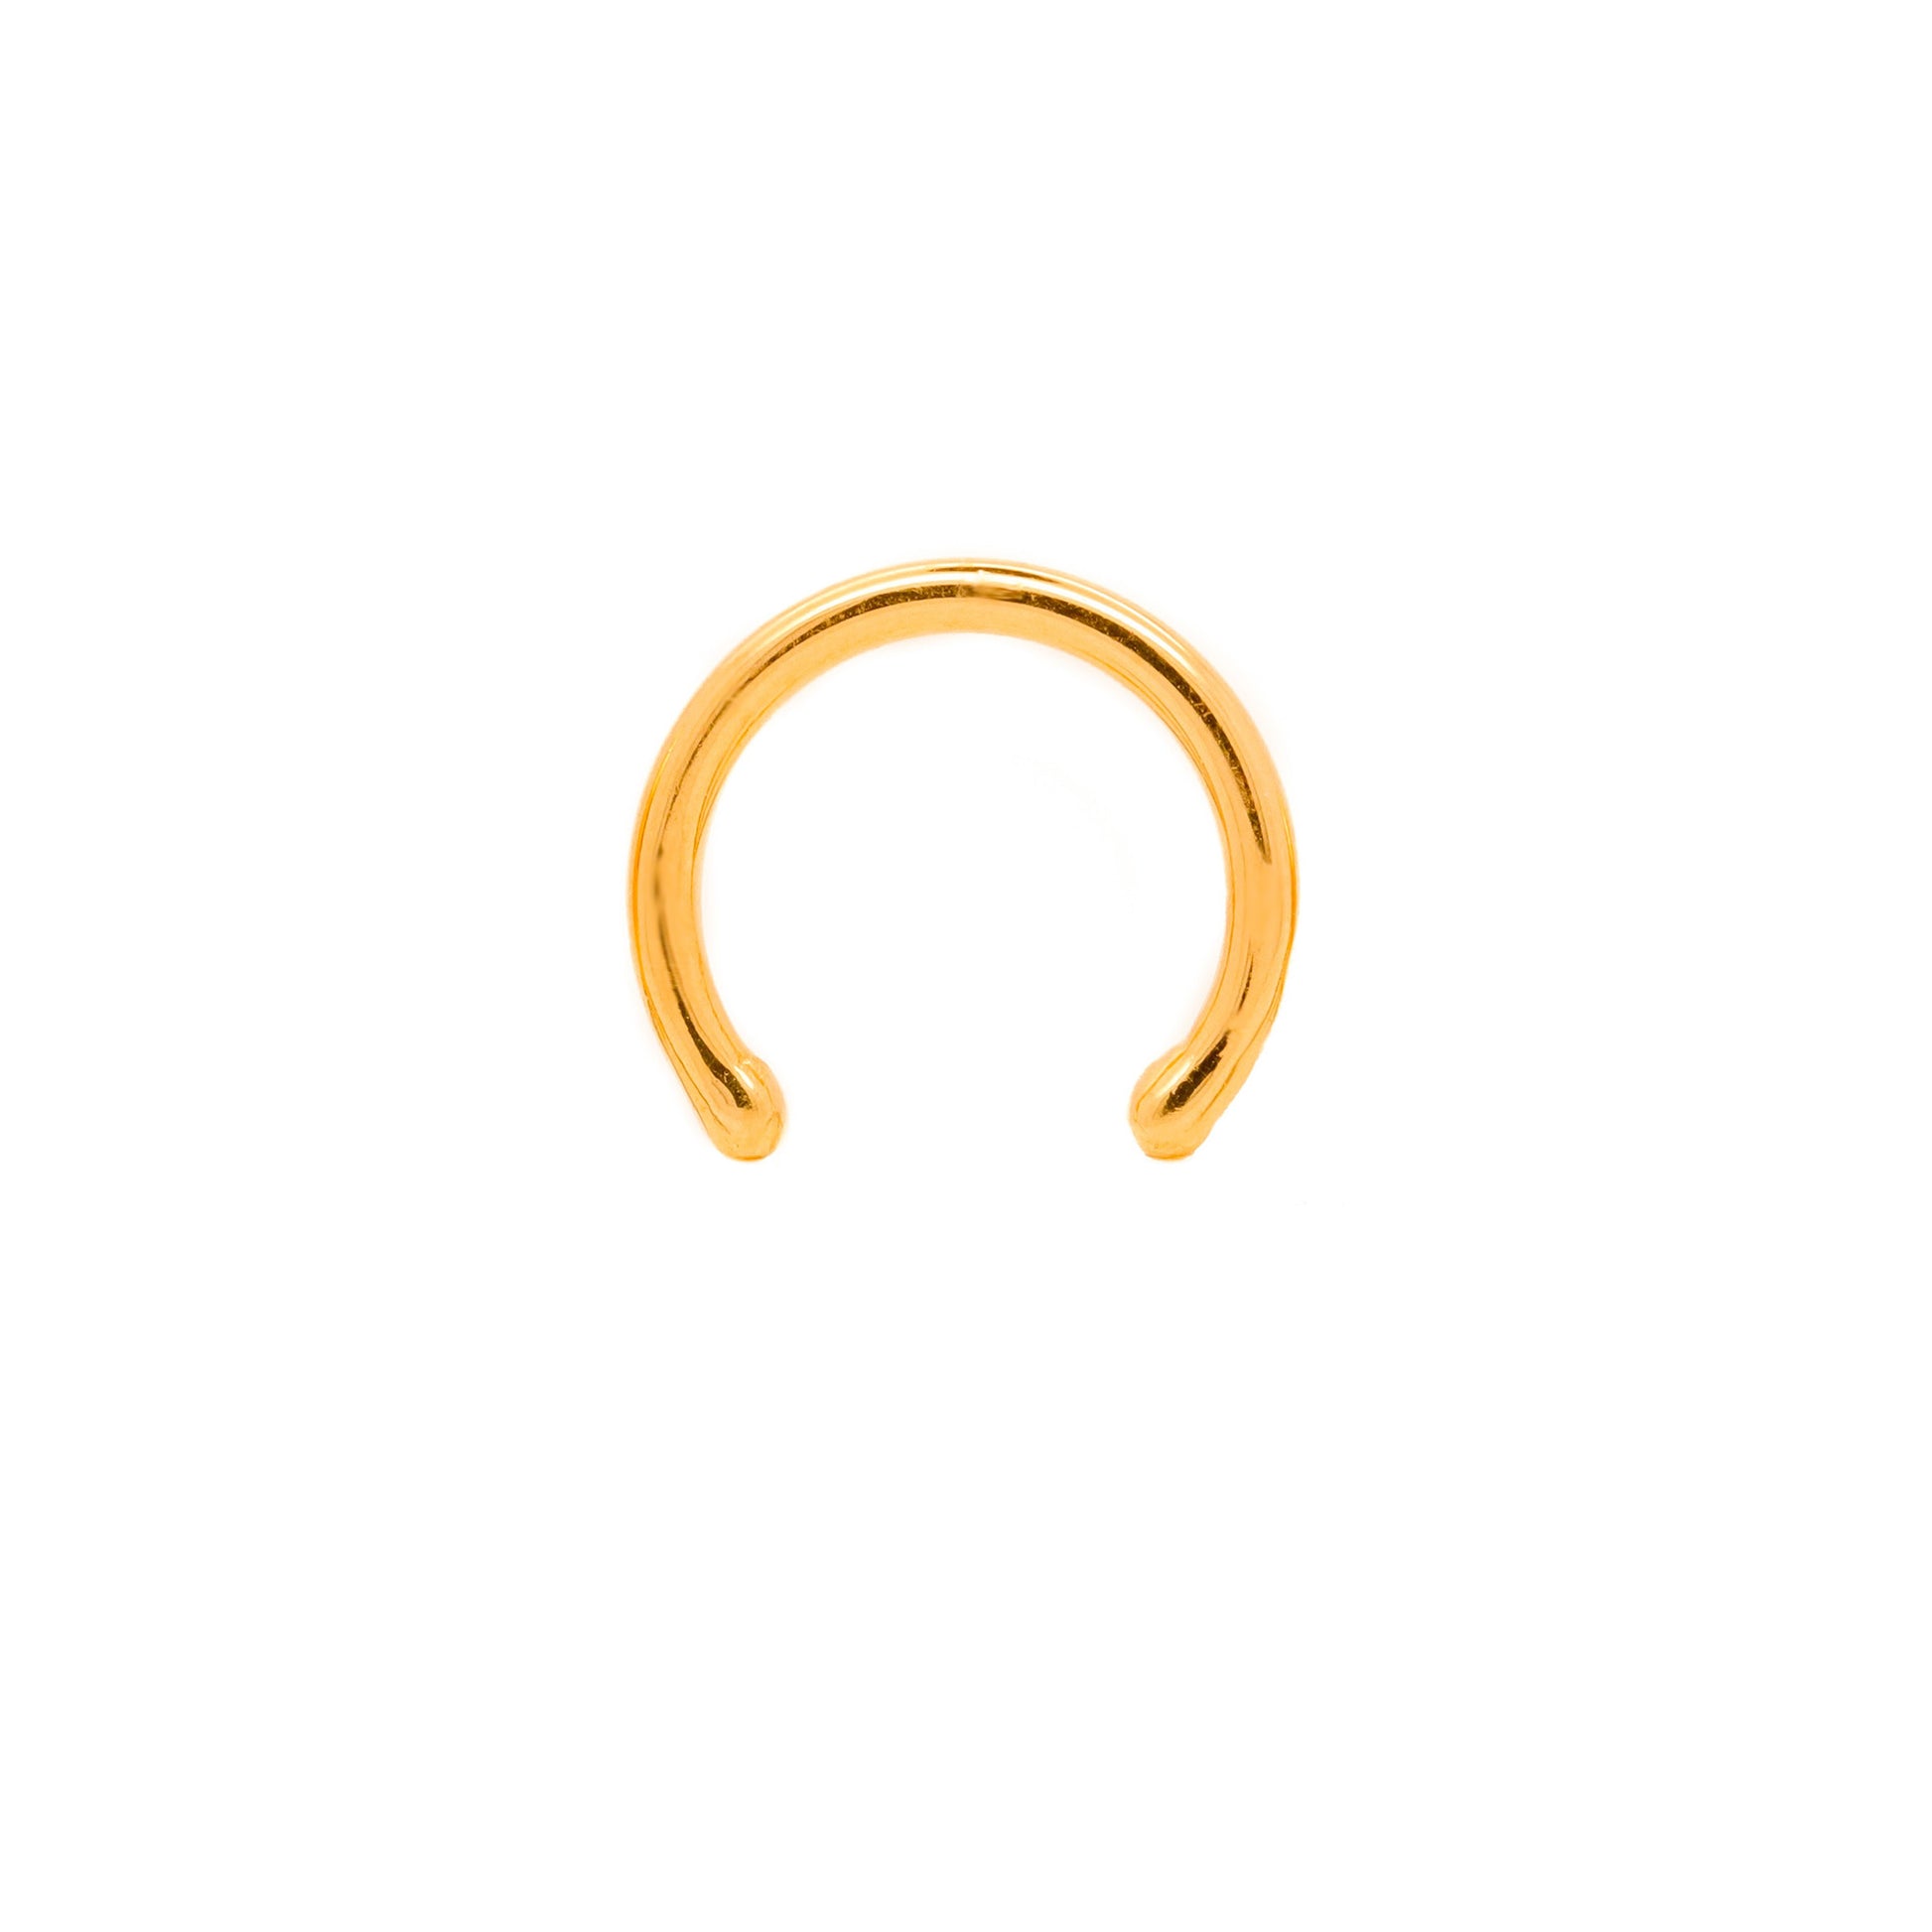 Vermeil | 24k Gold Coated 925 Silver 16G Simple Nose Hoop Horseshoe With Stopper | Circular Barbell | Septum | 6mm 8mm 10mm - Sturdy South